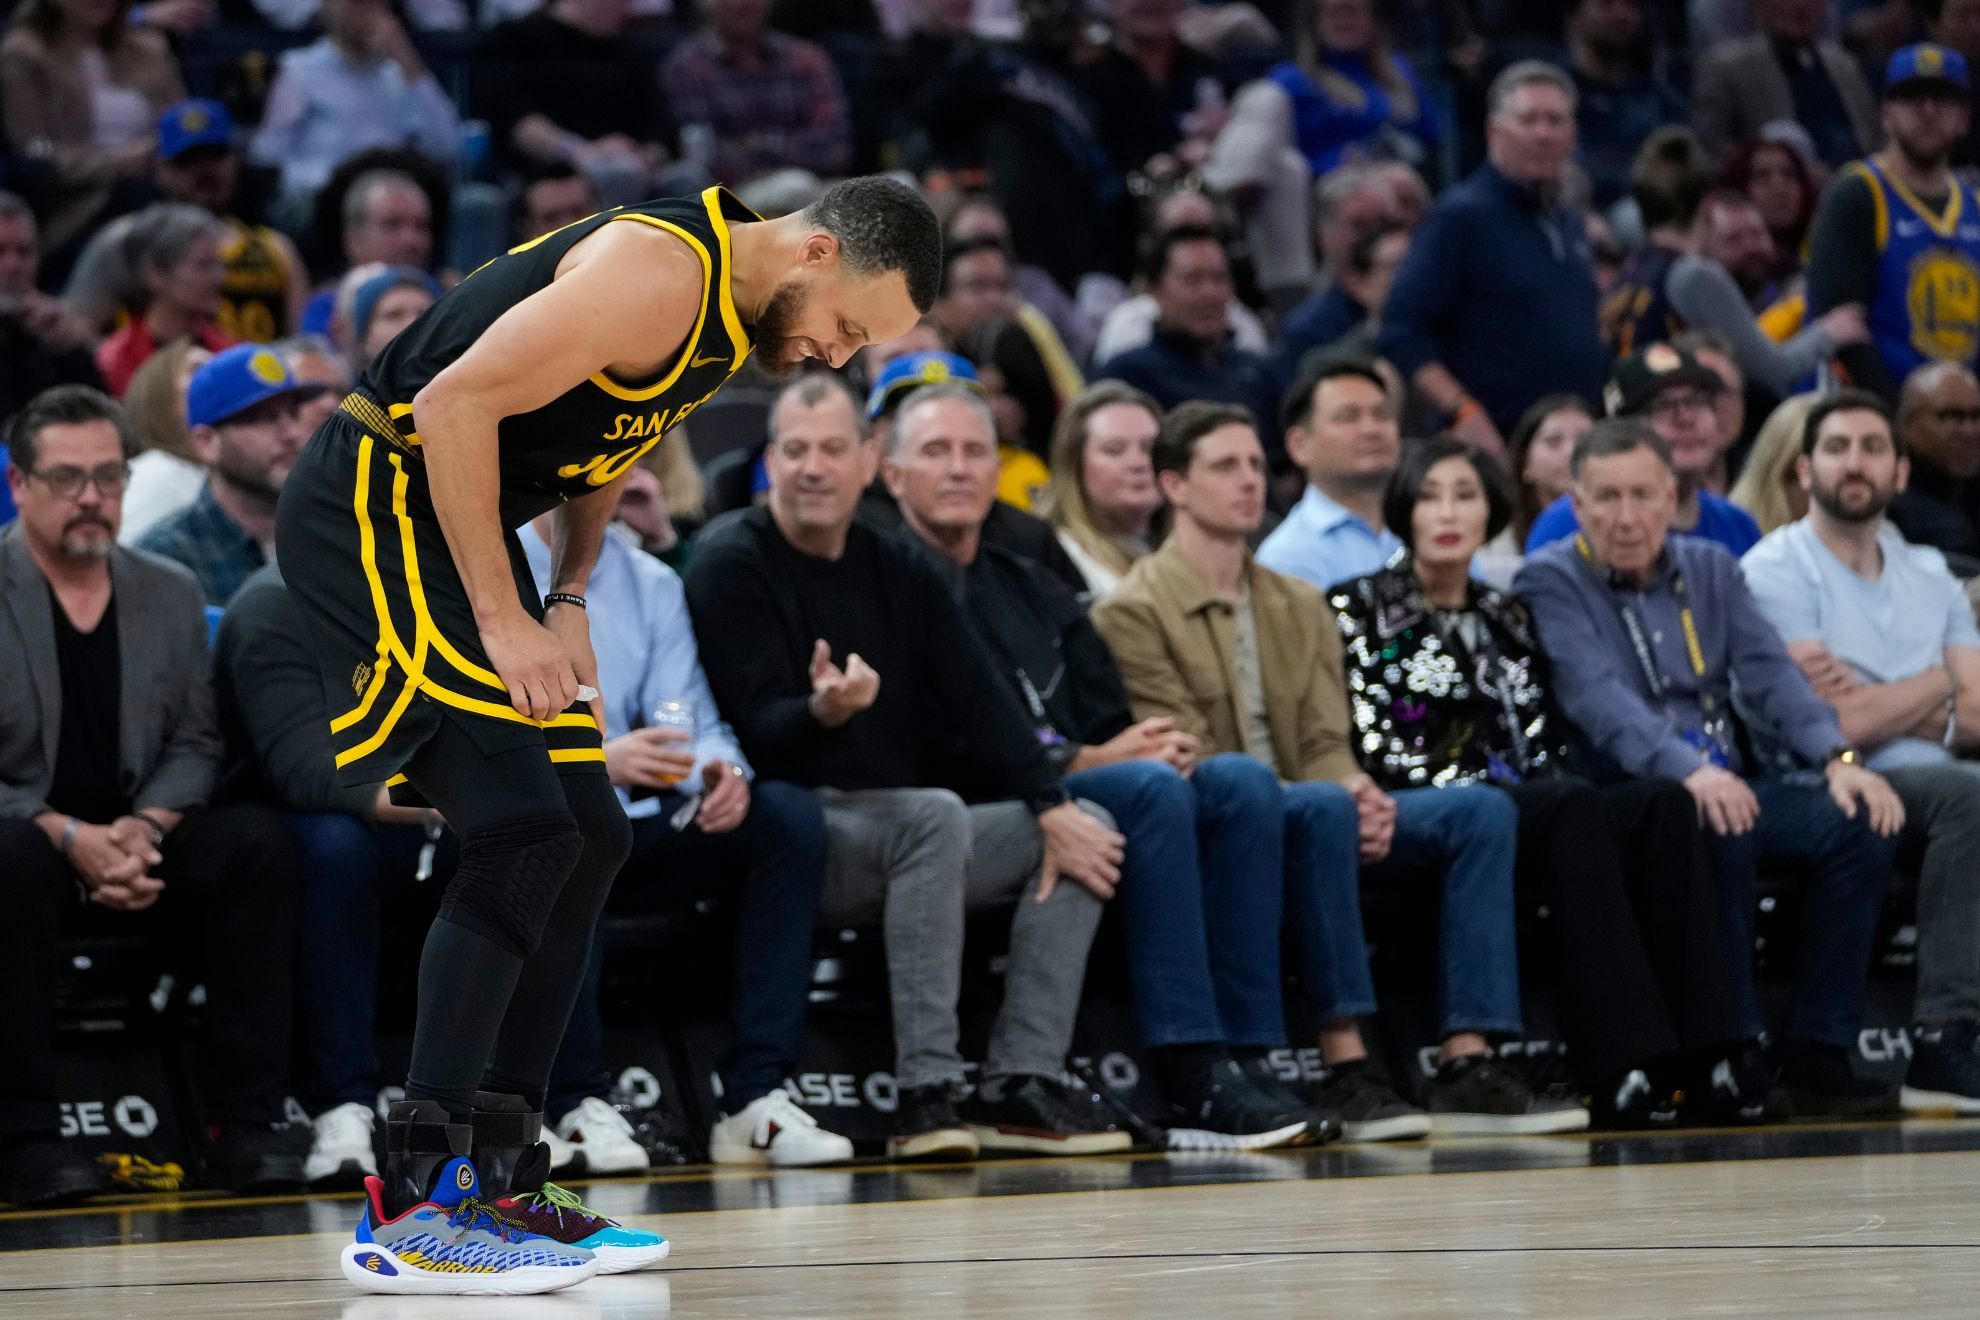 Stephen Curry received an MRI that confirmed a sprained right ankle after exiting Thursdays game against the Bulls.  Curry will not play in tonights game against the Spurs and will be re-evaluated again on Tuesday.